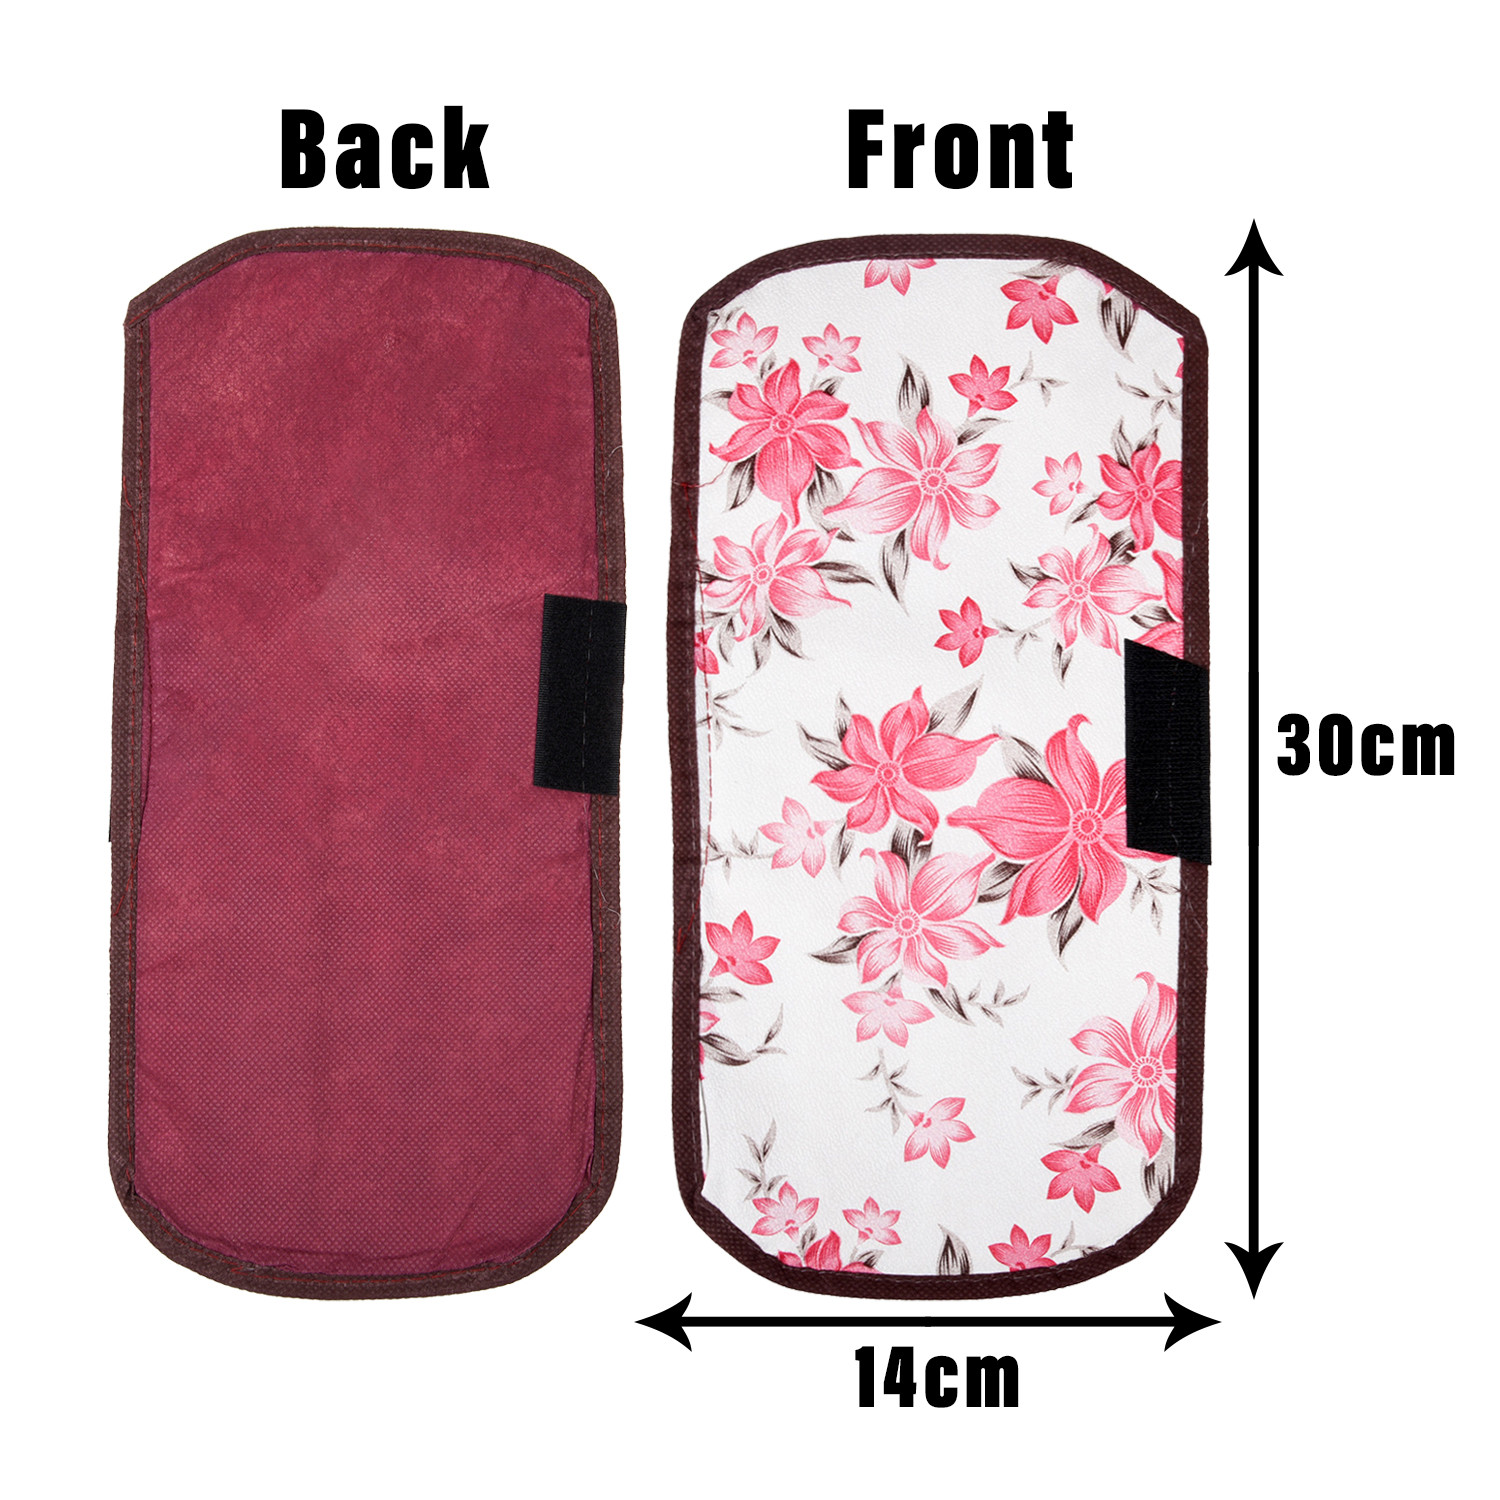 Kuber Industries Fridge Handle Cover | Refrigerator Handle Cover | Fridge Door Handle Protector | Fridge Door Handle Cover | Barik Flower Fridge Handle Cover | 2 Piece Set | Pink